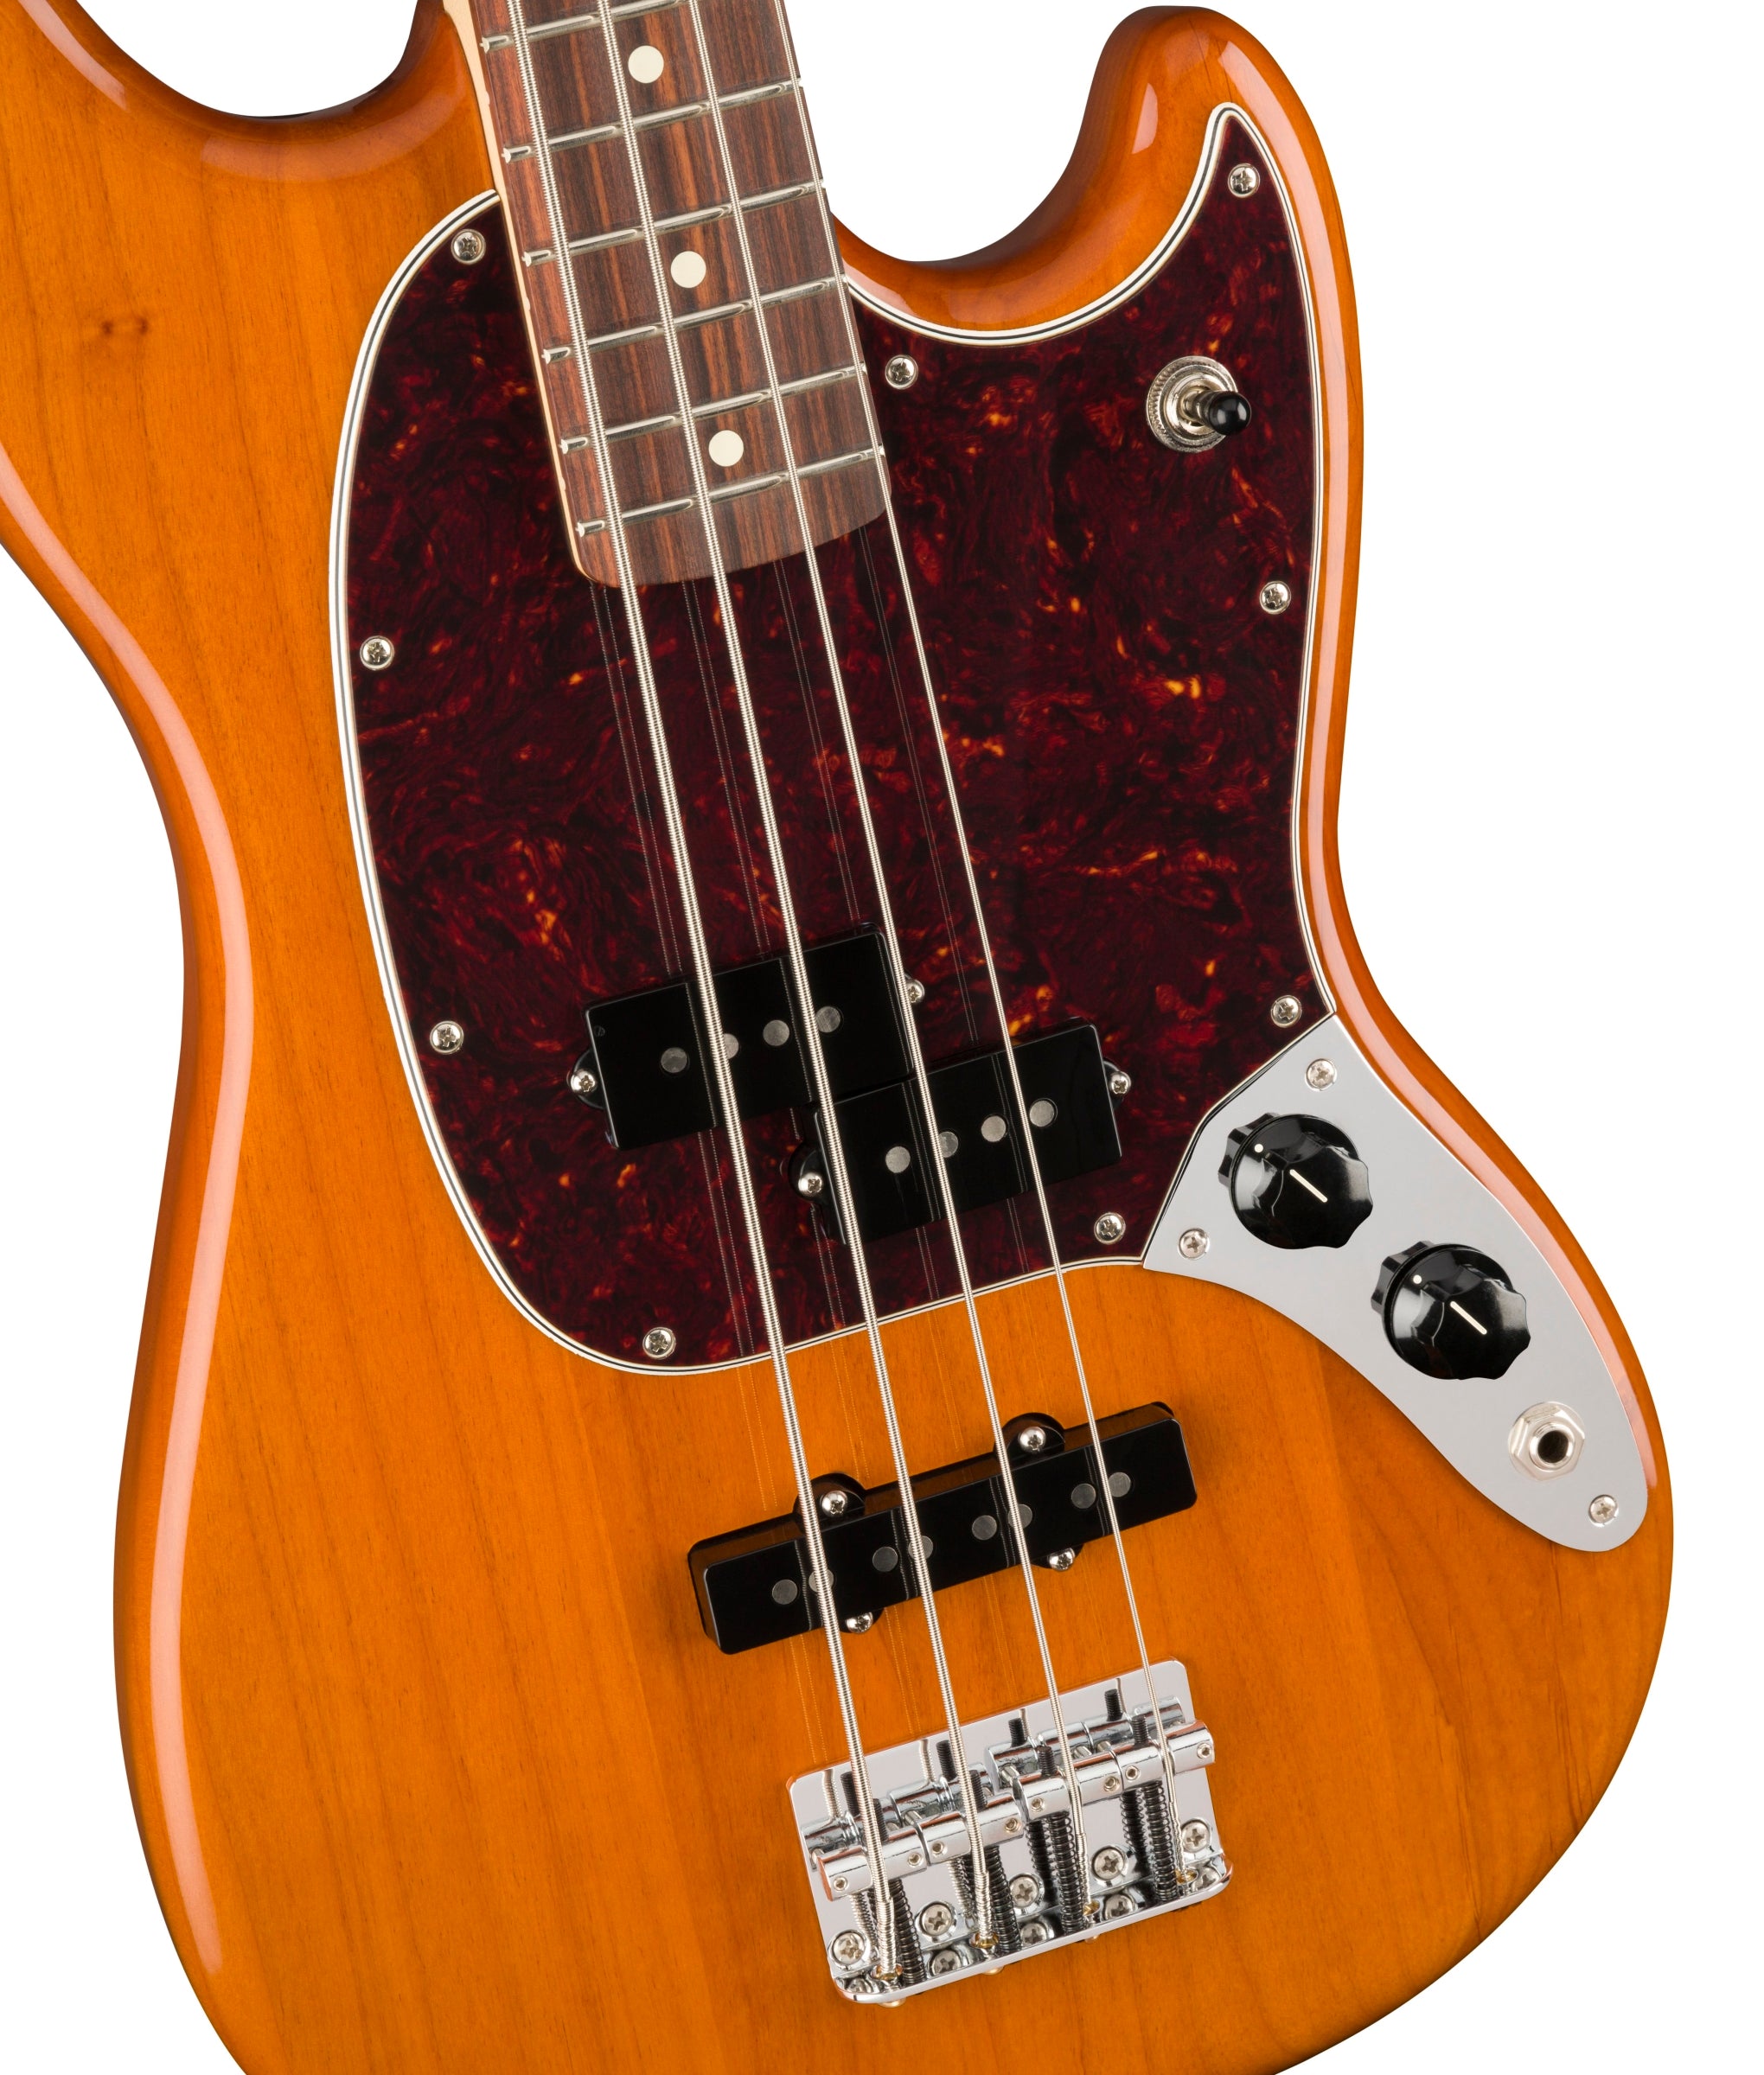 Fender Player Mustang Bass PJ 4-String Electric Bass - Aged Natural